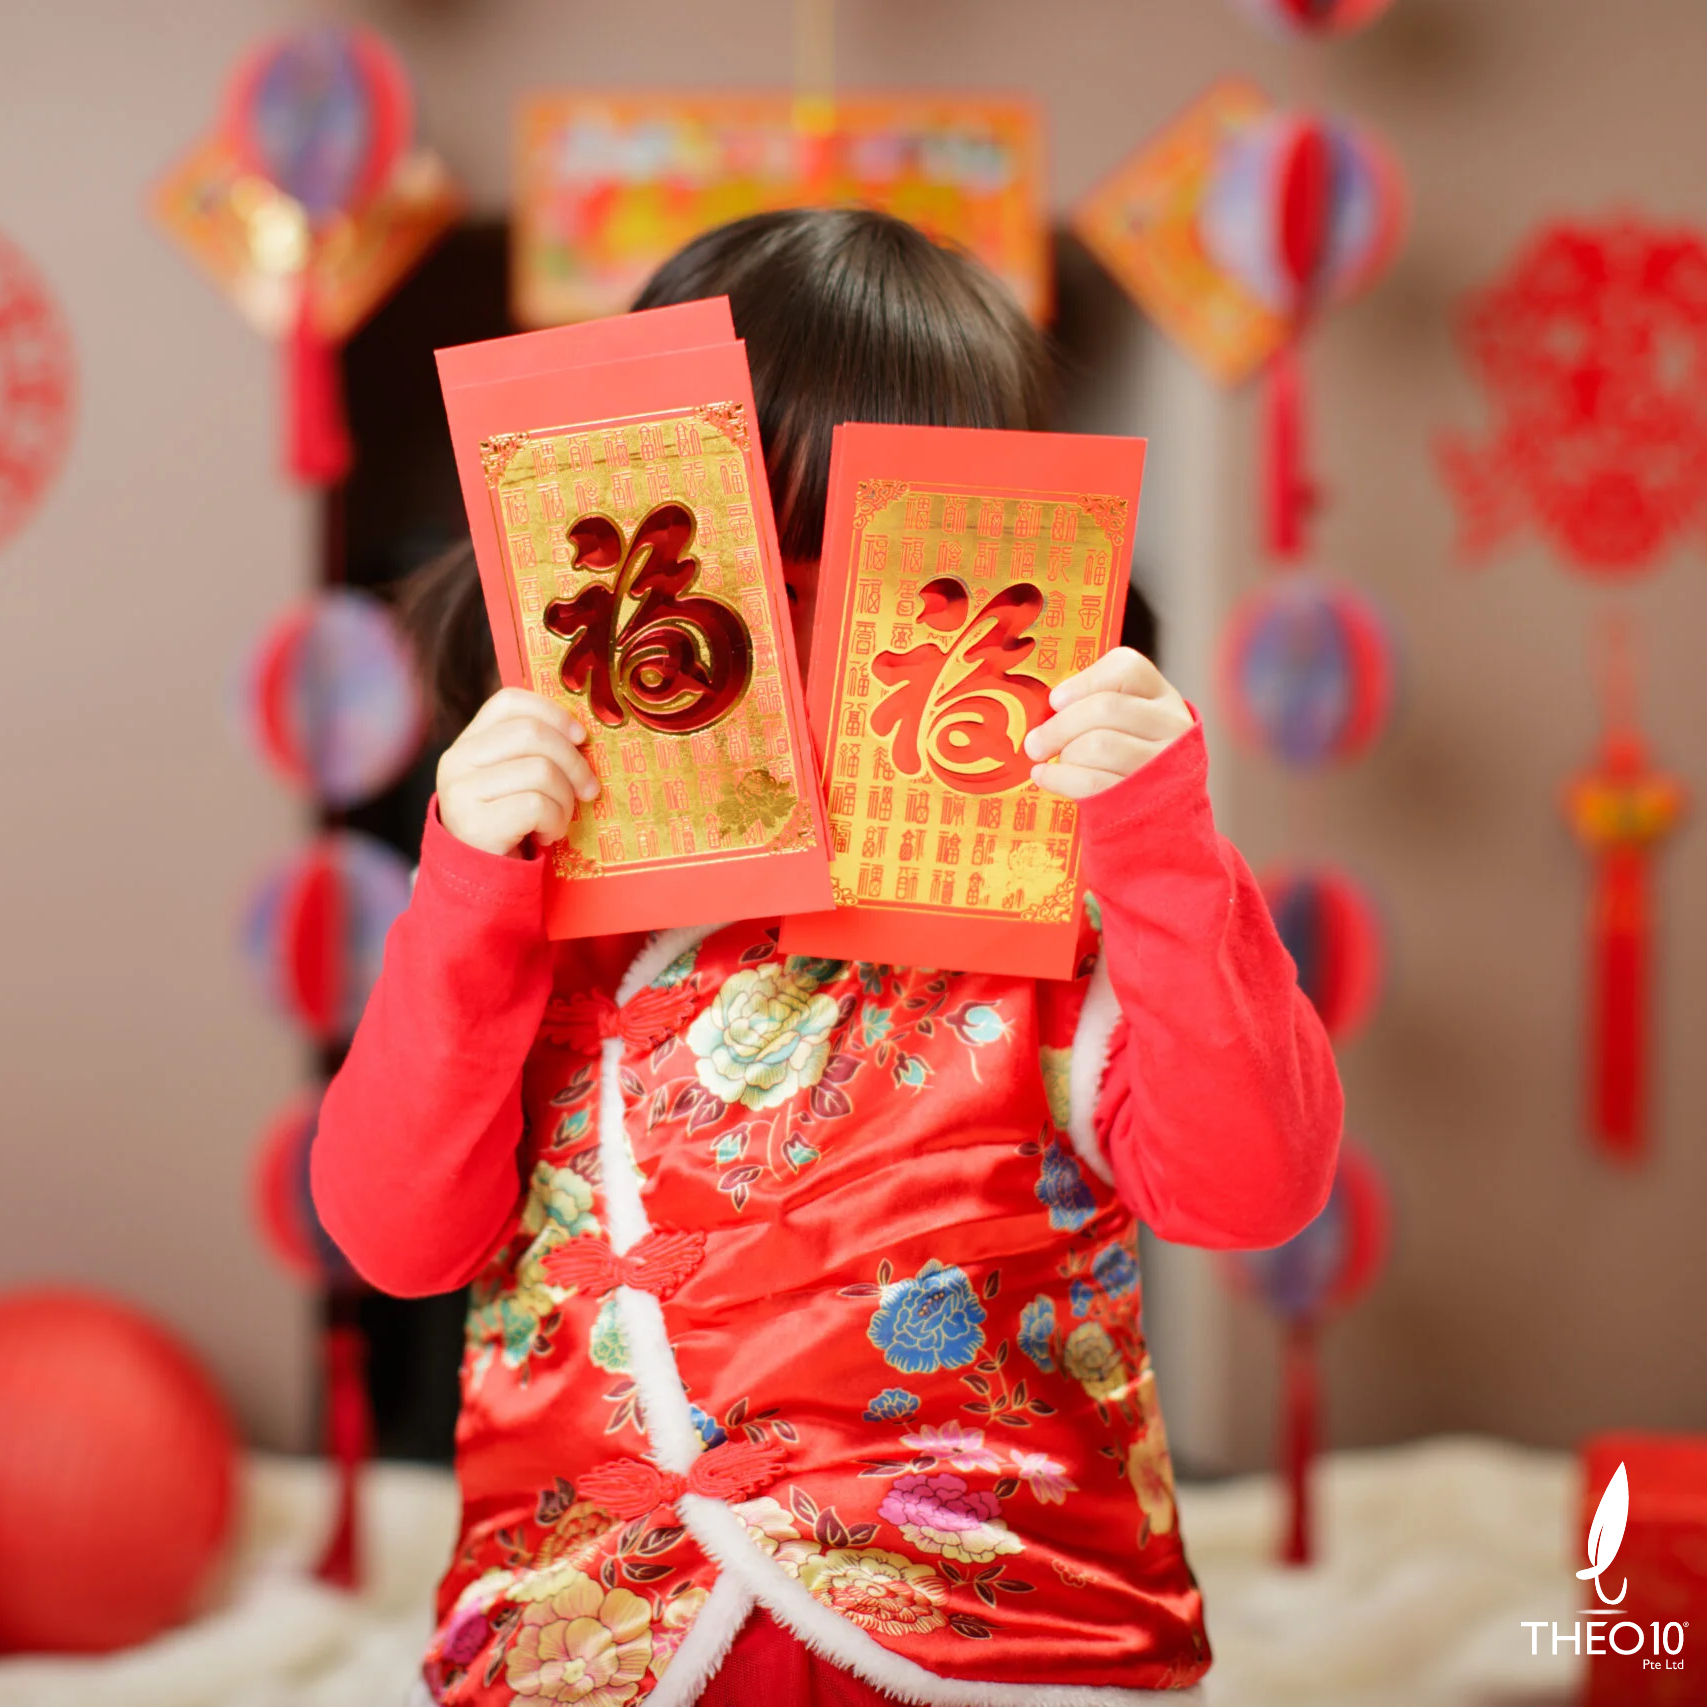 8 PRO TIPS TO CELEBRATE CHINESE NEW YEAR